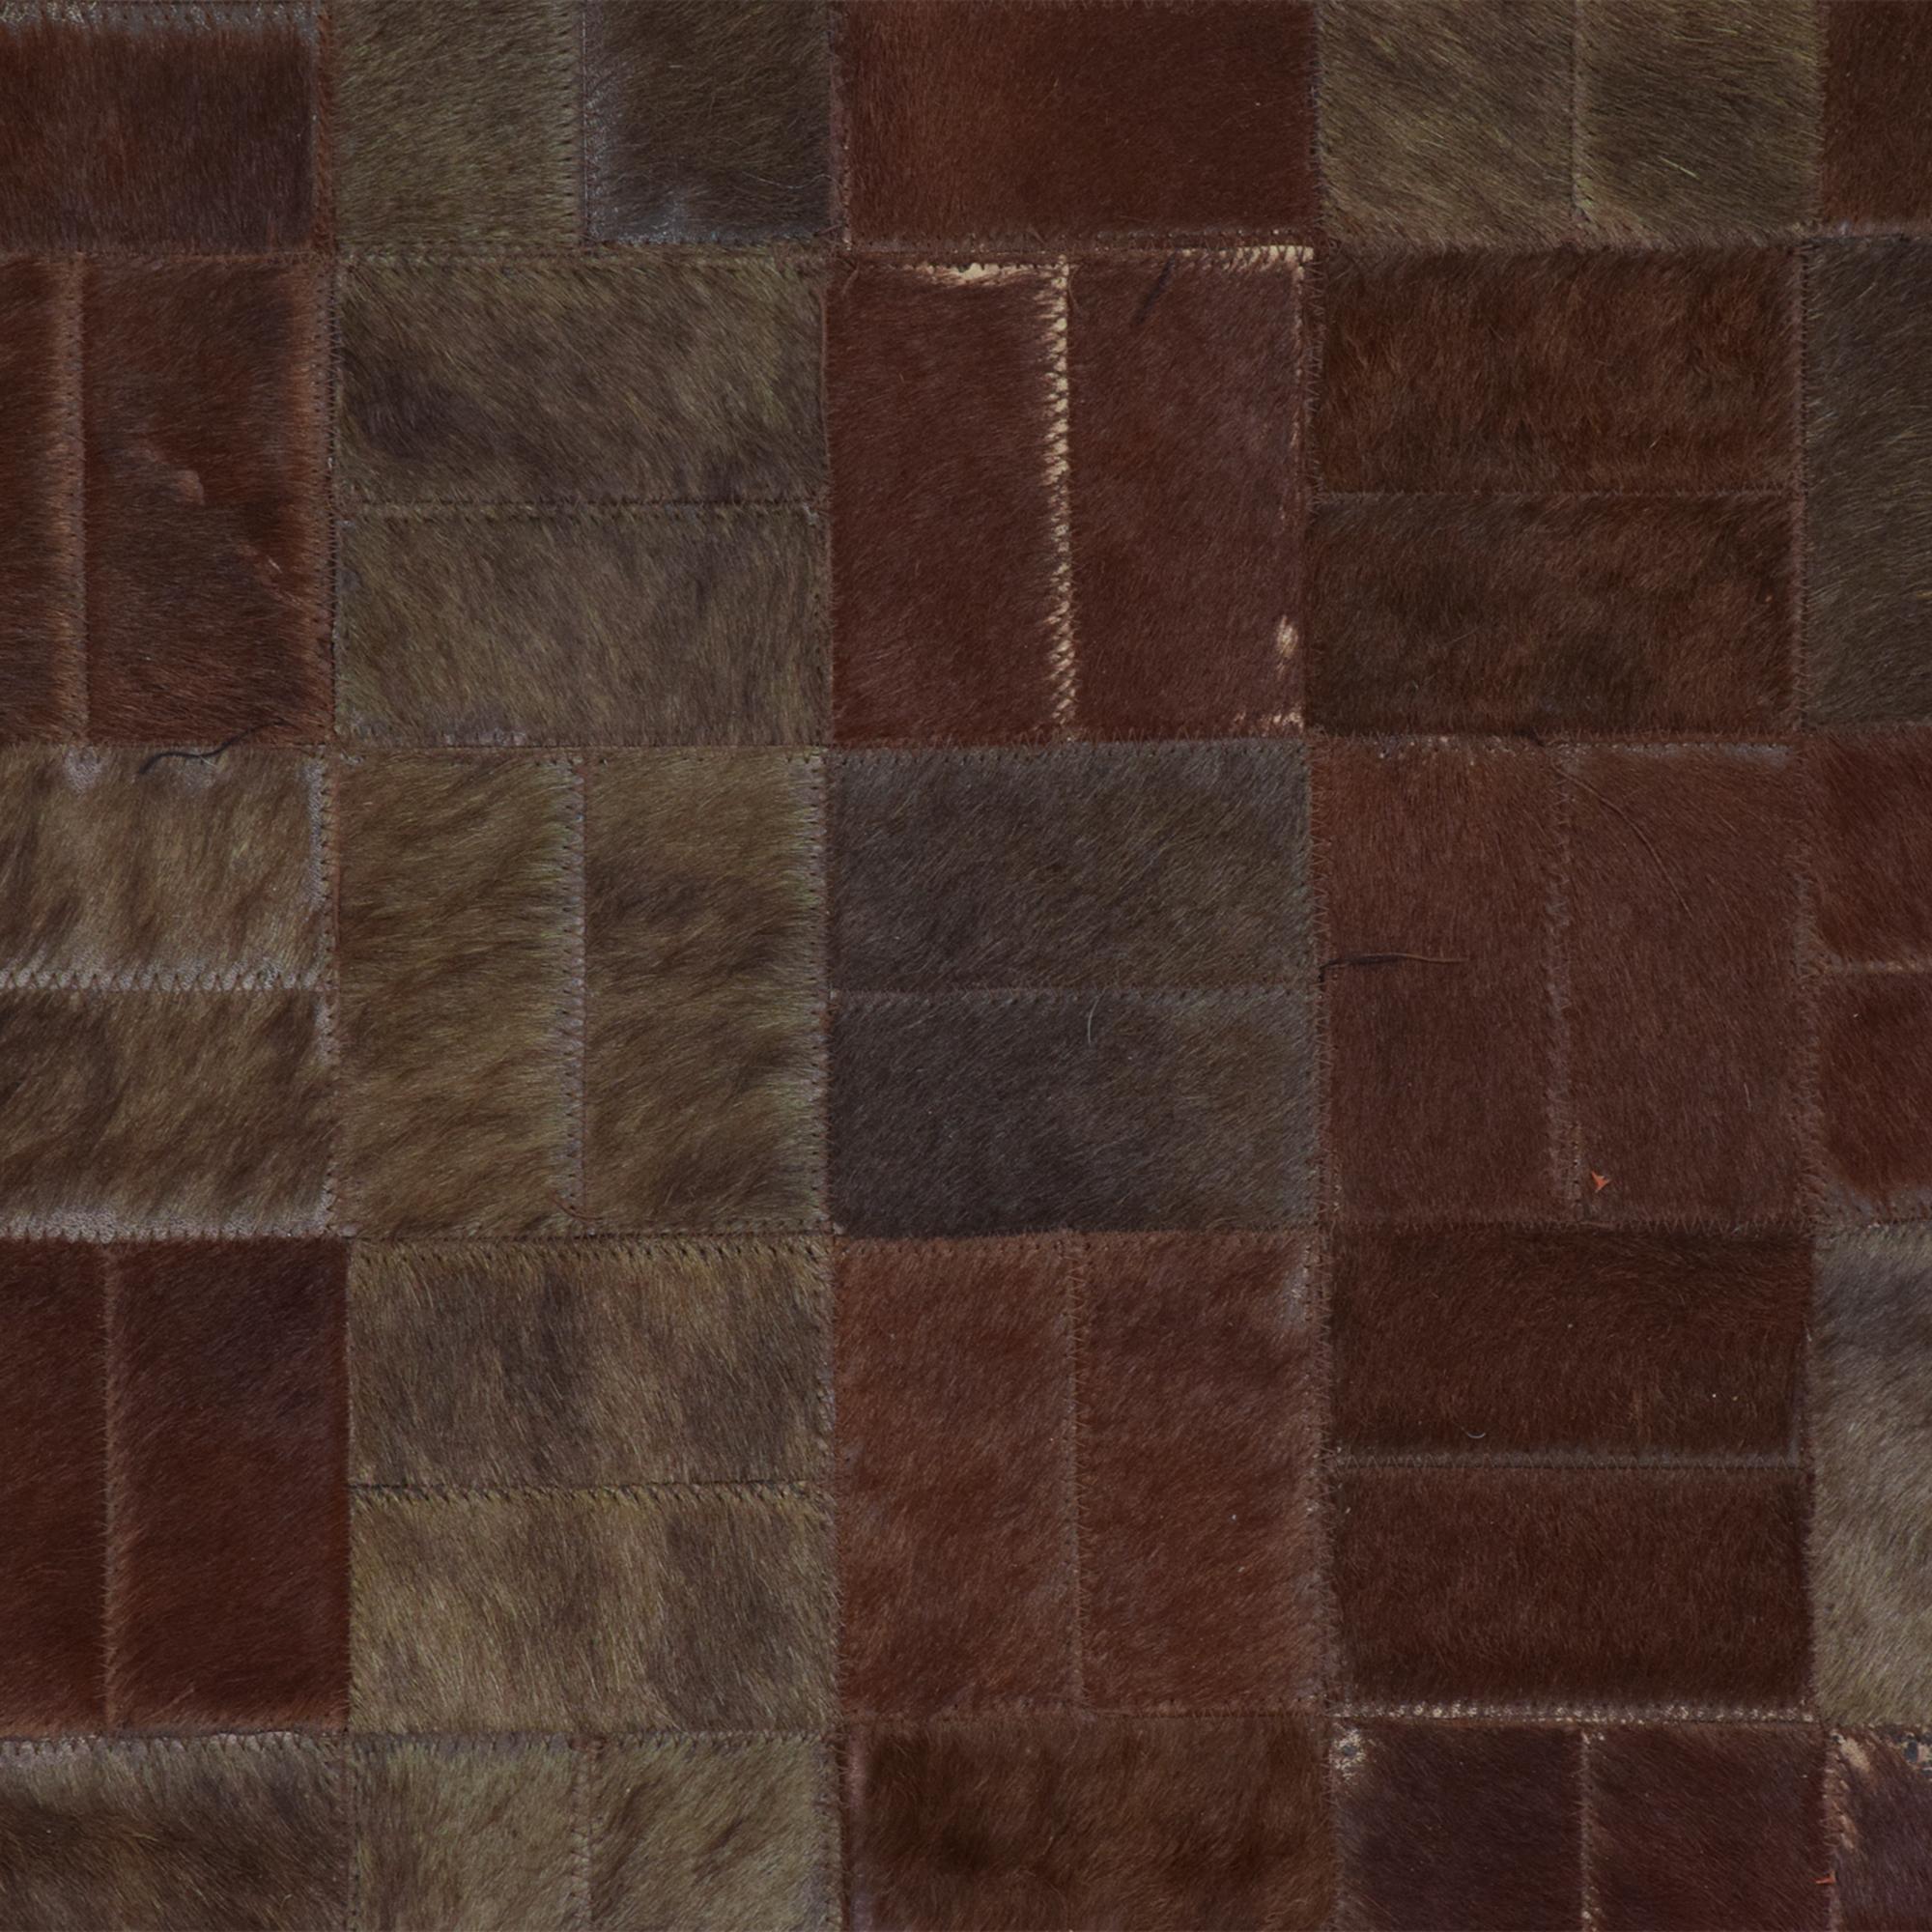 Mid-Century Modern brutalist era mosaic square pattern patchwork cowhide brown leather rug.
Mosaic patchwork of square patterns of cowhide in varied warm tones.
Unmarked. In the style of Paul Evans Brutalism.
Dimensions: 99 x 158 inches
Original